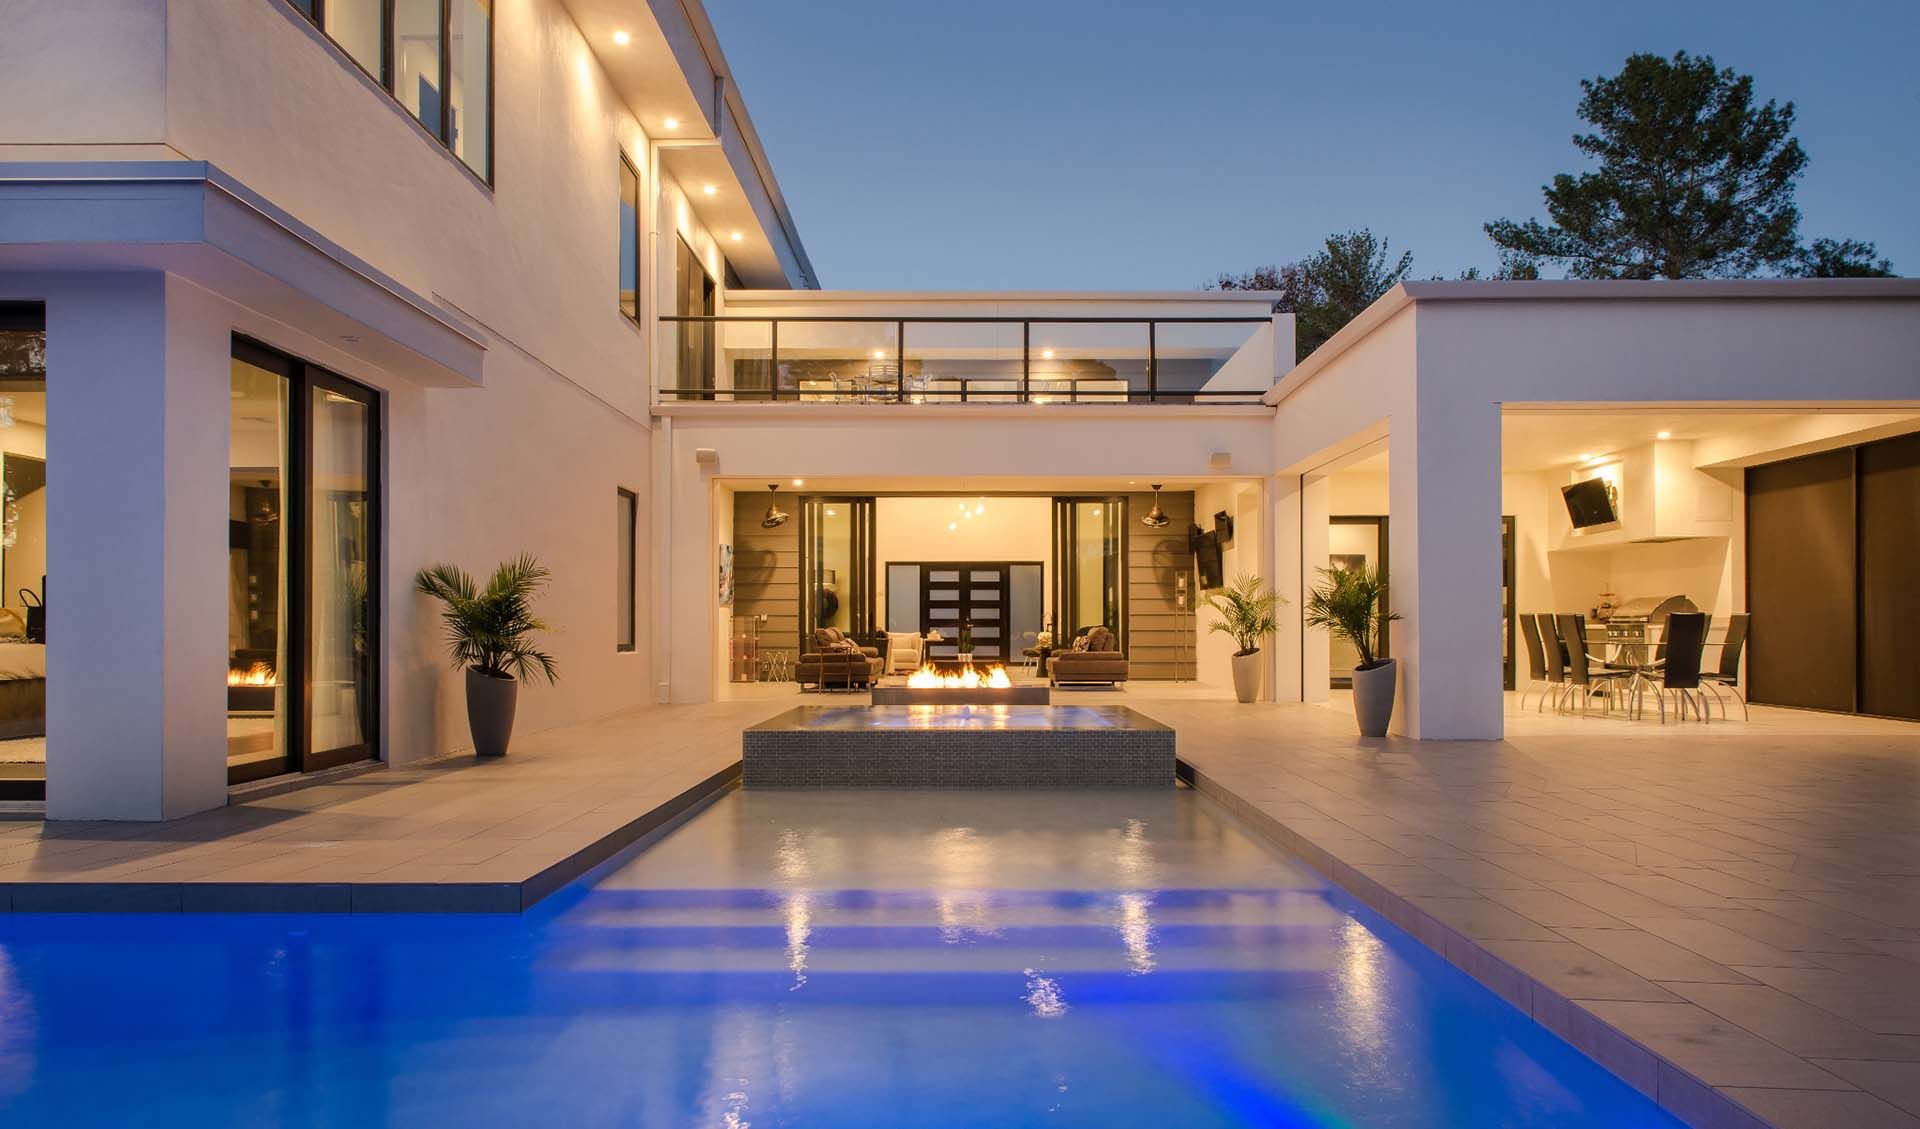 Outside view of a modern house with a big pool and fireplace